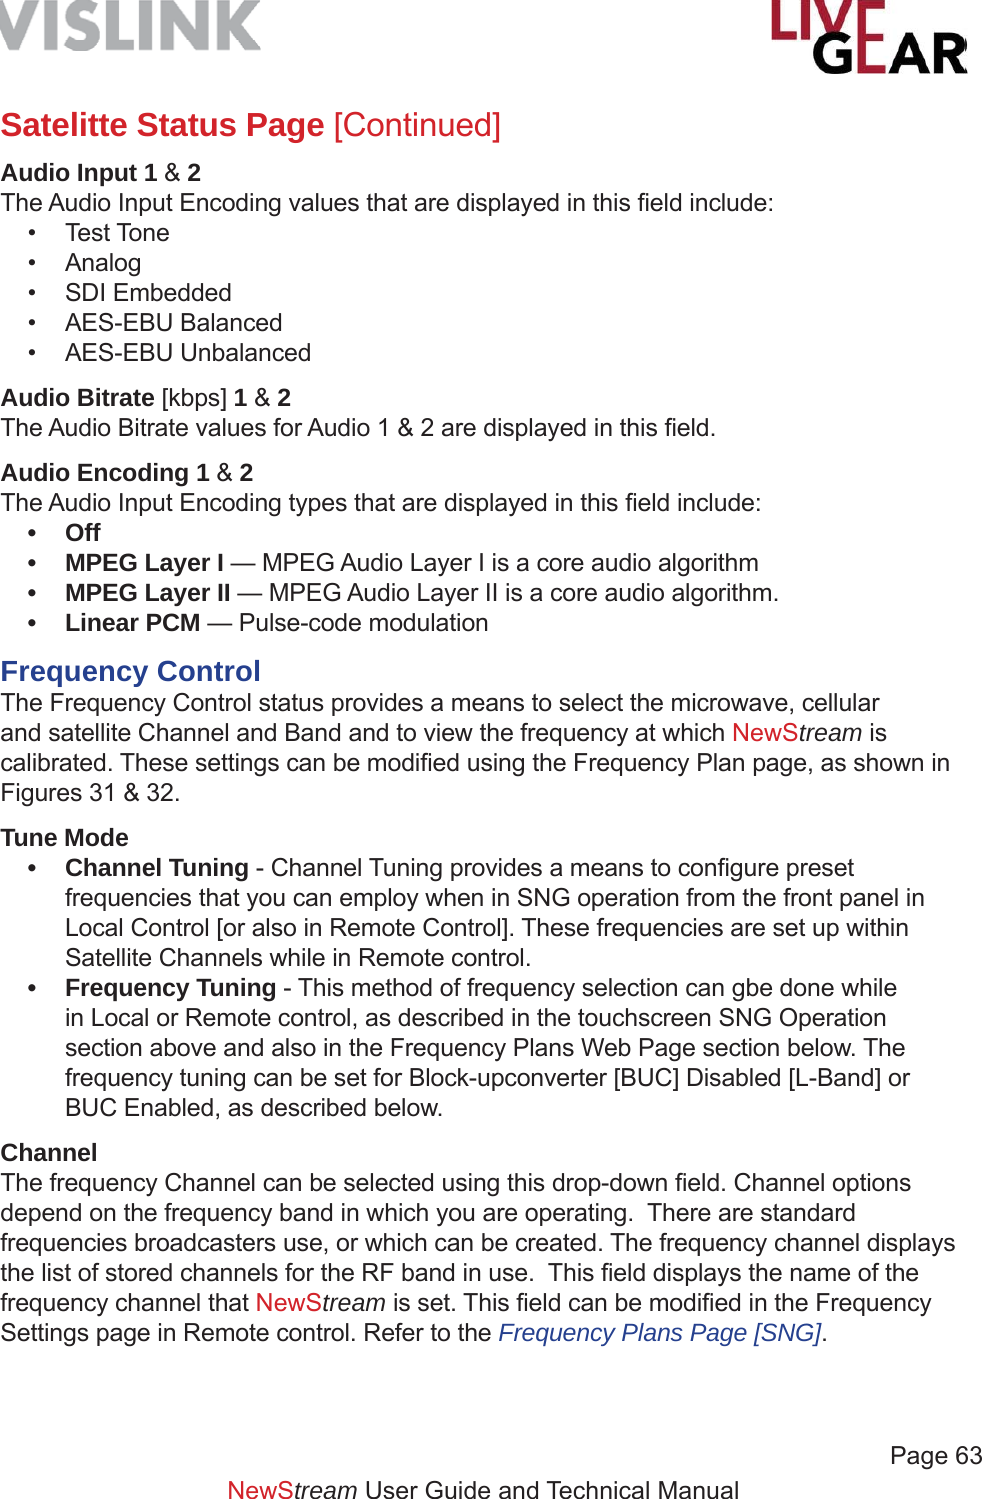             Page 63NewStream User Guide and Technical ManualSatelitte Status Page [Continued]Audio Input 1 &amp; 2The Audio Input Encoding values that are displayed in this ﬁ eld include:• Test Tone  • Analog • SDI Embedded • AES-EBU Balanced• AES-EBU UnbalancedAudio Bitrate [kbps] 1 &amp; 2The Audio Bitrate values for Audio 1 &amp; 2 are displayed in this ﬁ eld.Audio Encoding 1 &amp; 2The Audio Input Encoding types that are displayed in this ﬁ eld include:• Off•  MPEG Layer I — MPEG Audio Layer I is a core audio algorithm•  MPEG Layer II — MPEG Audio Layer II is a core audio algorithm.• Linear PCM — Pulse-code modulation Frequency ControlThe Frequency Control status provides a means to select the microwave, cellular and satellite Channel and Band and to view the frequency at which NewStream is calibrated. These settings can be modiﬁ ed using the Frequency Plan page, as shown in Figures 31 &amp; 32.Tune Mode• Channel Tuning - Channel Tuning provides a means to conﬁ gure preset frequencies that you can employ when in SNG operation from the front panel in Local Control [or also in Remote Control]. These frequencies are set up within Satellite Channels while in Remote control.• Frequency Tuning - This method of frequency selection can gbe done while in Local or Remote control, as described in the touchscreen SNG Operation section above and also in the Frequency Plans Web Page section below. The frequency tuning can be set for Block-upconverter [BUC] Disabled [L-Band] or BUC Enabled, as described below.ChannelThe frequency Channel can be selected using this drop-down ﬁ eld. Channel options depend on the frequency band in which you are operating.  There are standard frequencies broadcasters use, or which can be created. The frequency channel displays the list of stored channels for the RF band in use.  This ﬁ eld displays the name of the frequency channel that NewStream is set. This ﬁ eld can be modiﬁ ed in the Frequency Settings page in Remote control. Refer to the Frequency Plans Page [SNG].